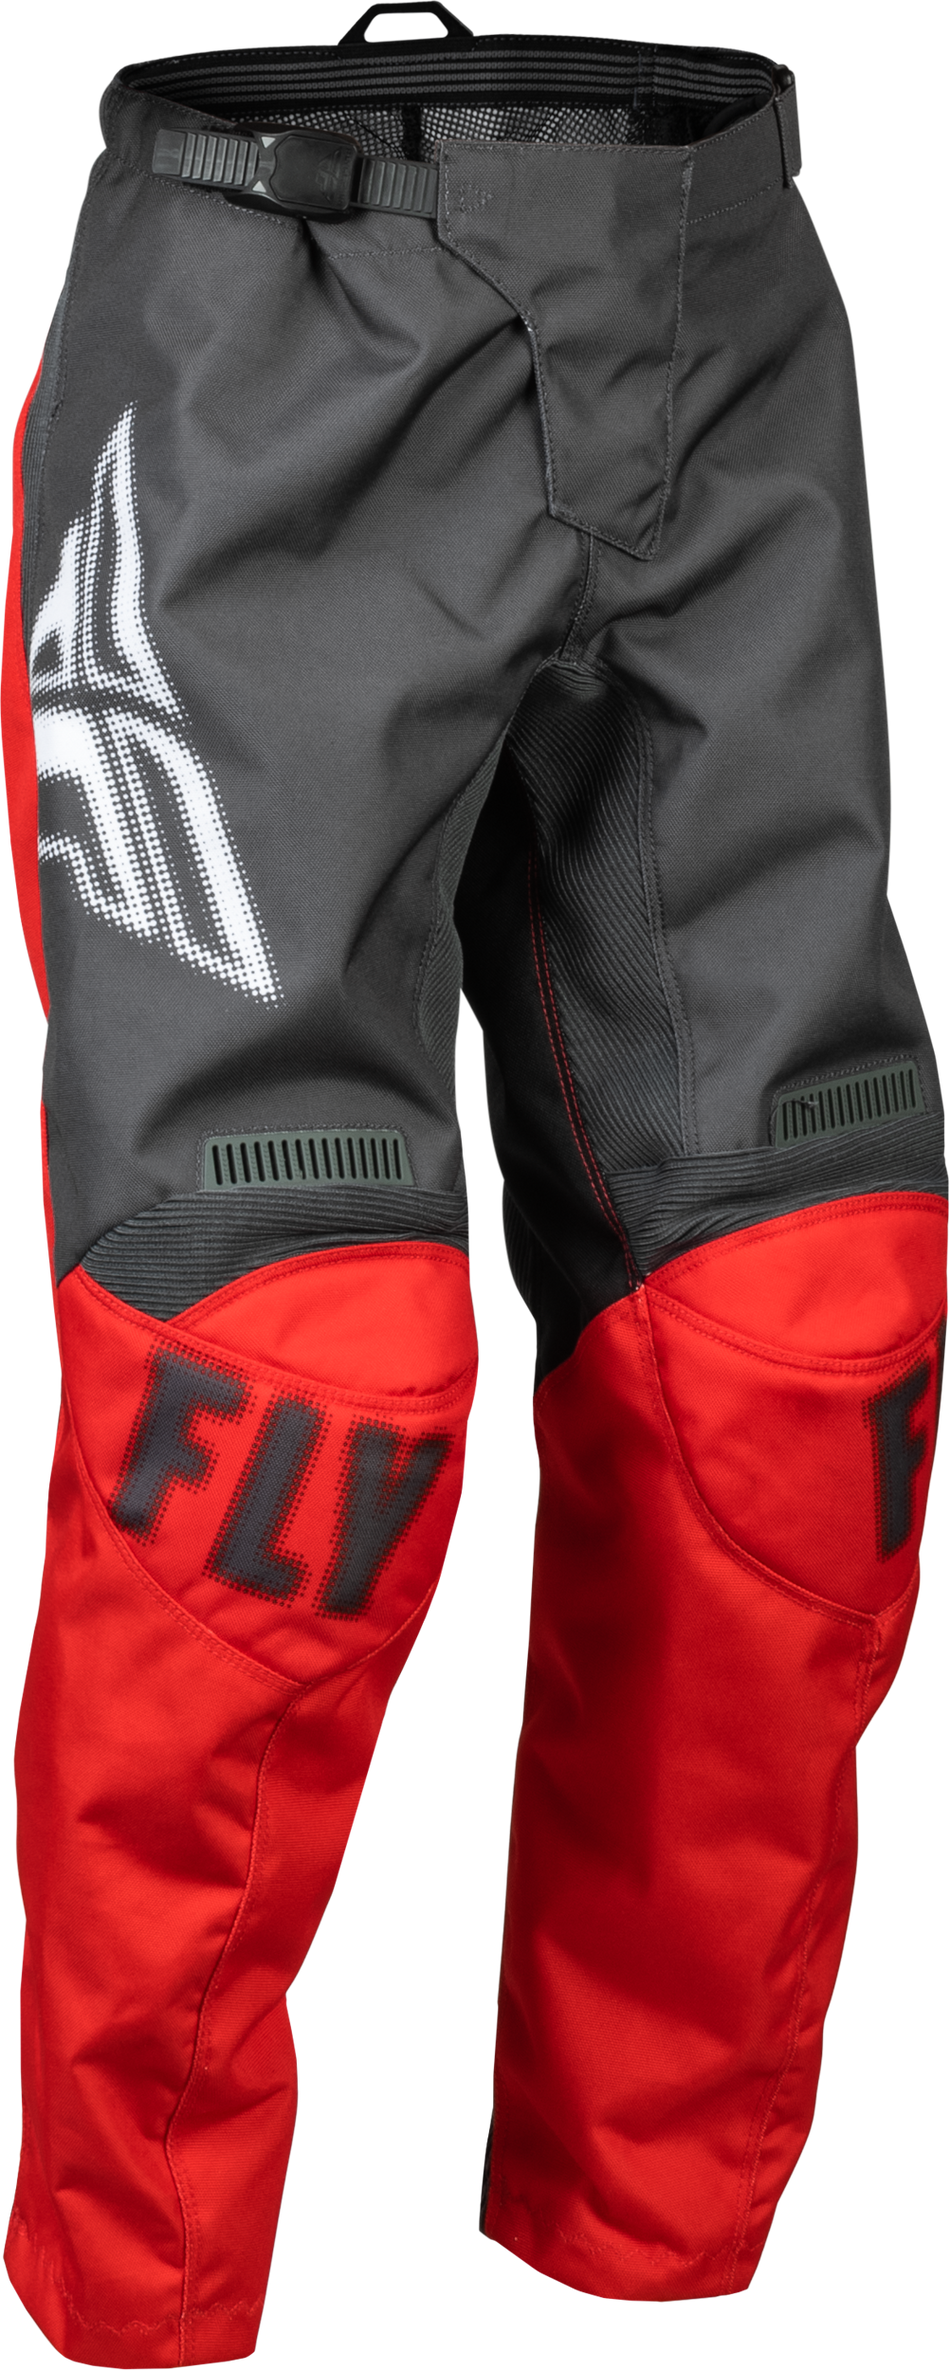 FLY RACING Youth F-16 Pants Grey/Red Sz 18 376-23418